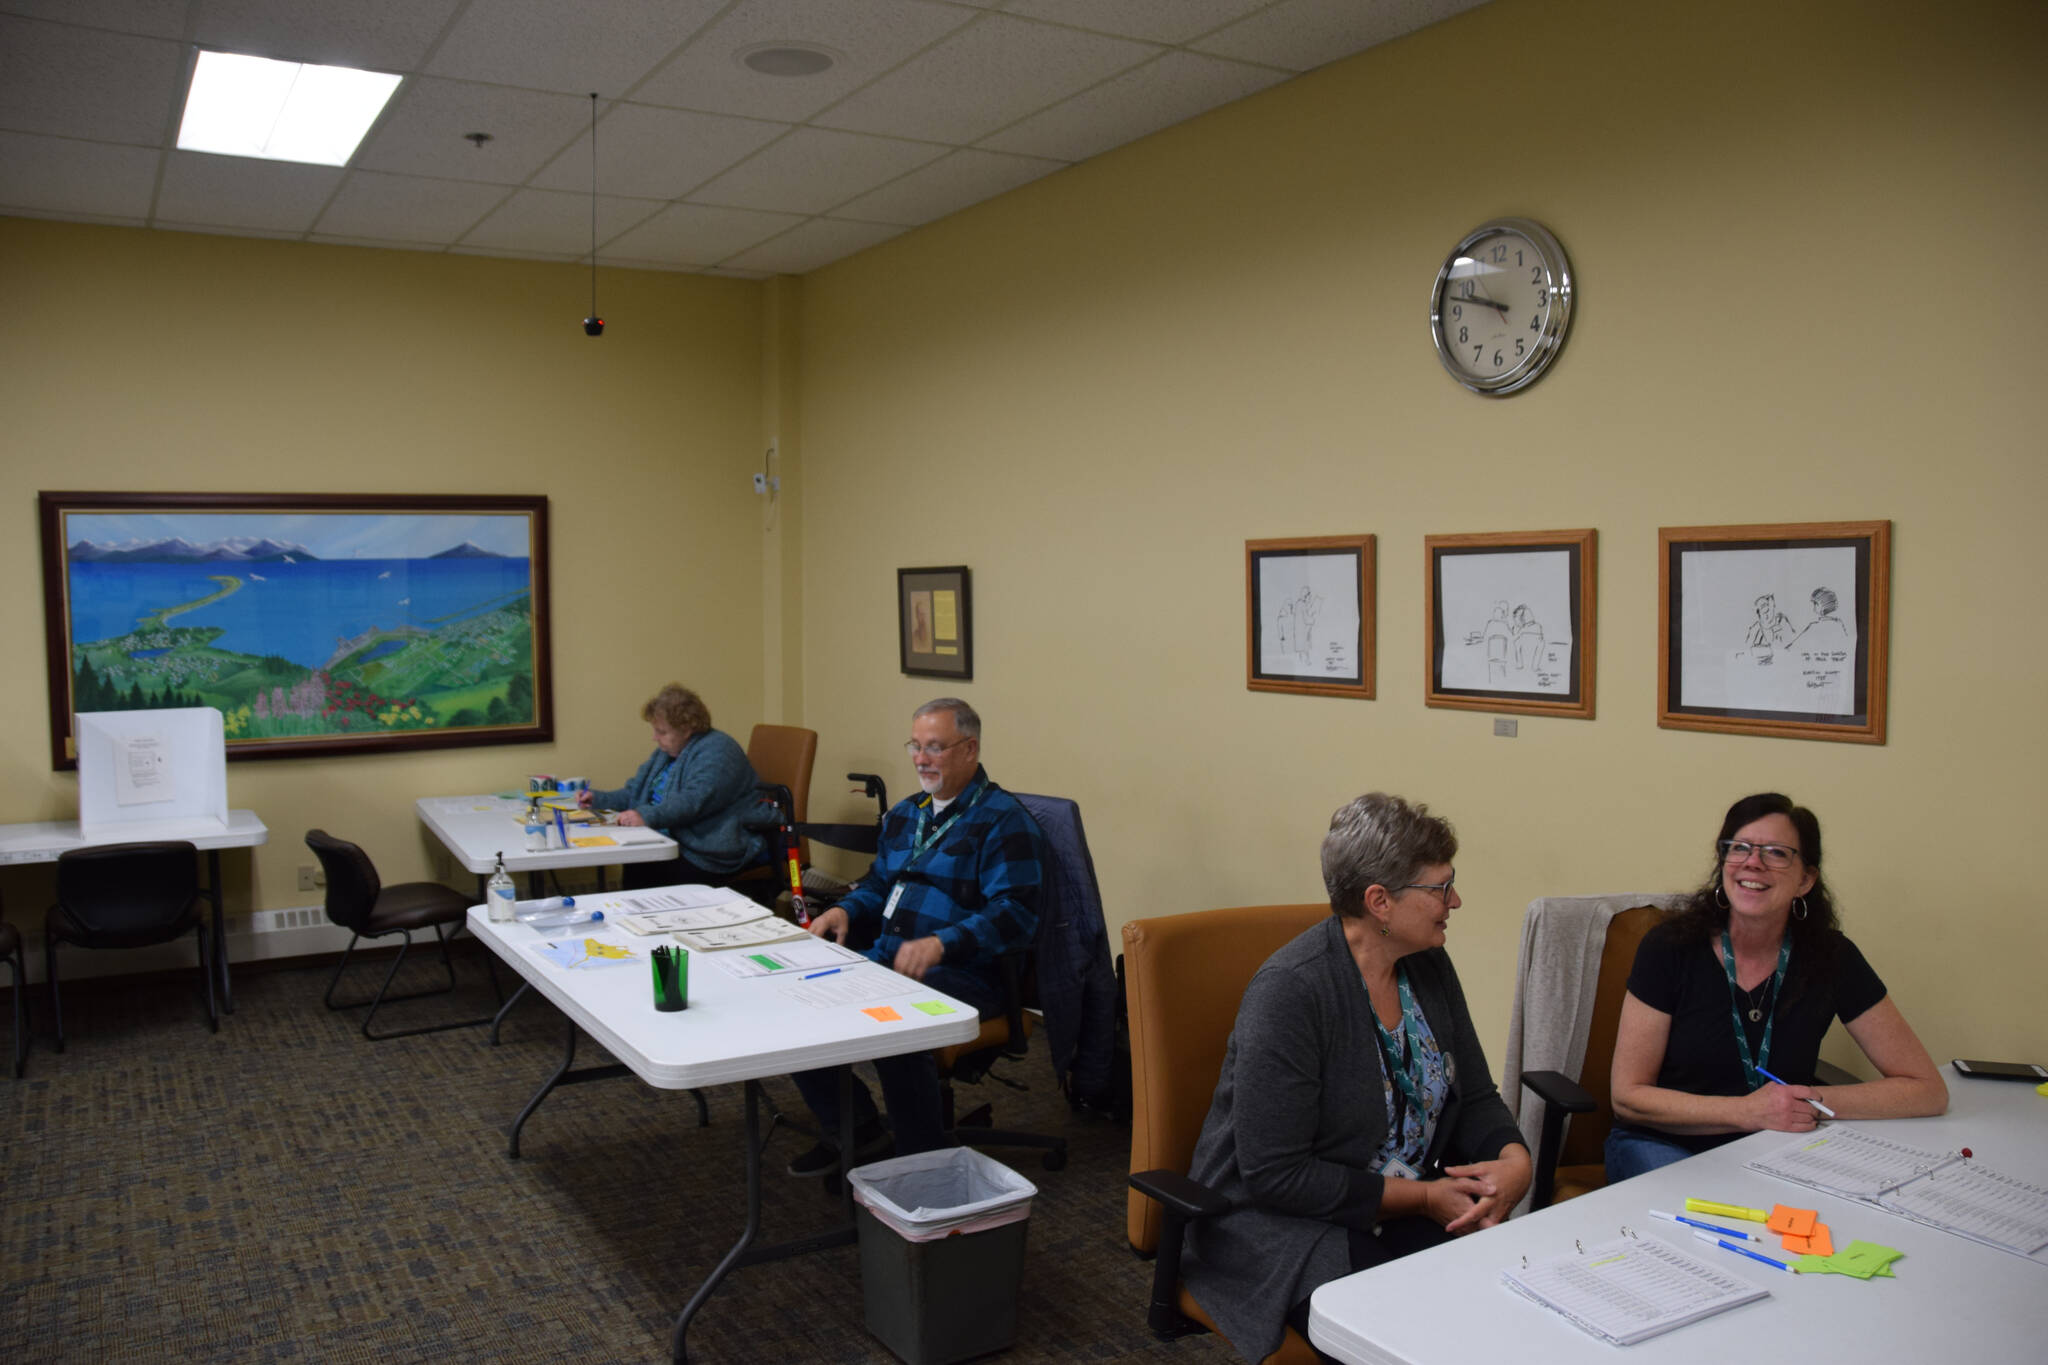 Voter registrars at the Kenai Peninsula Borough and City of Homer elections at Cowles Council Chambers on Tuesday, Oct. 4, 2022 in Homer, Alaska. (Photo by Charlie Menke/ Homer News)